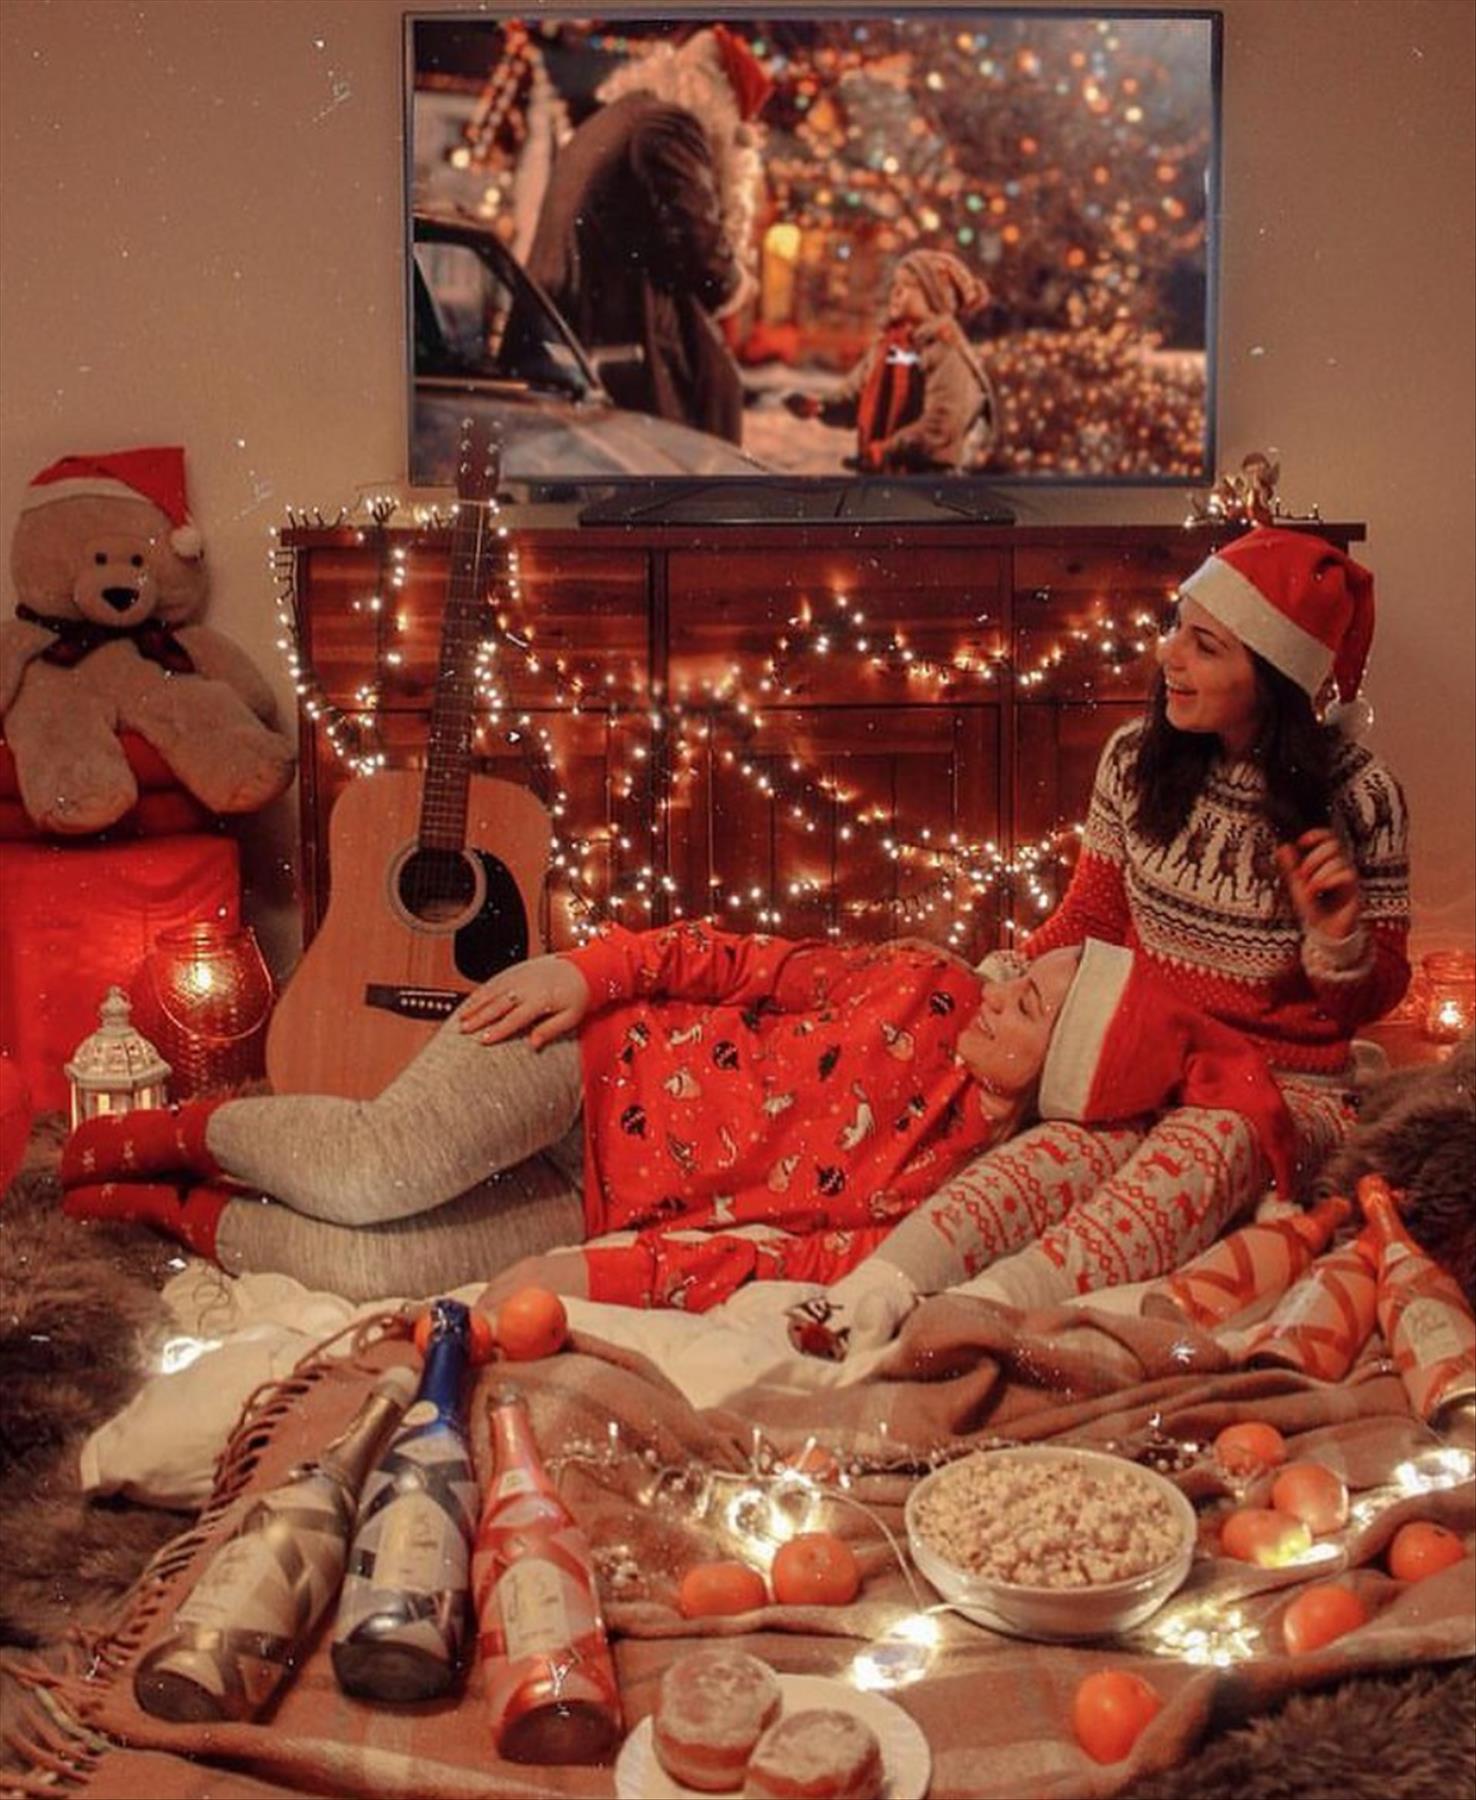 Merry Christmas decoration ideas to rock this Winter